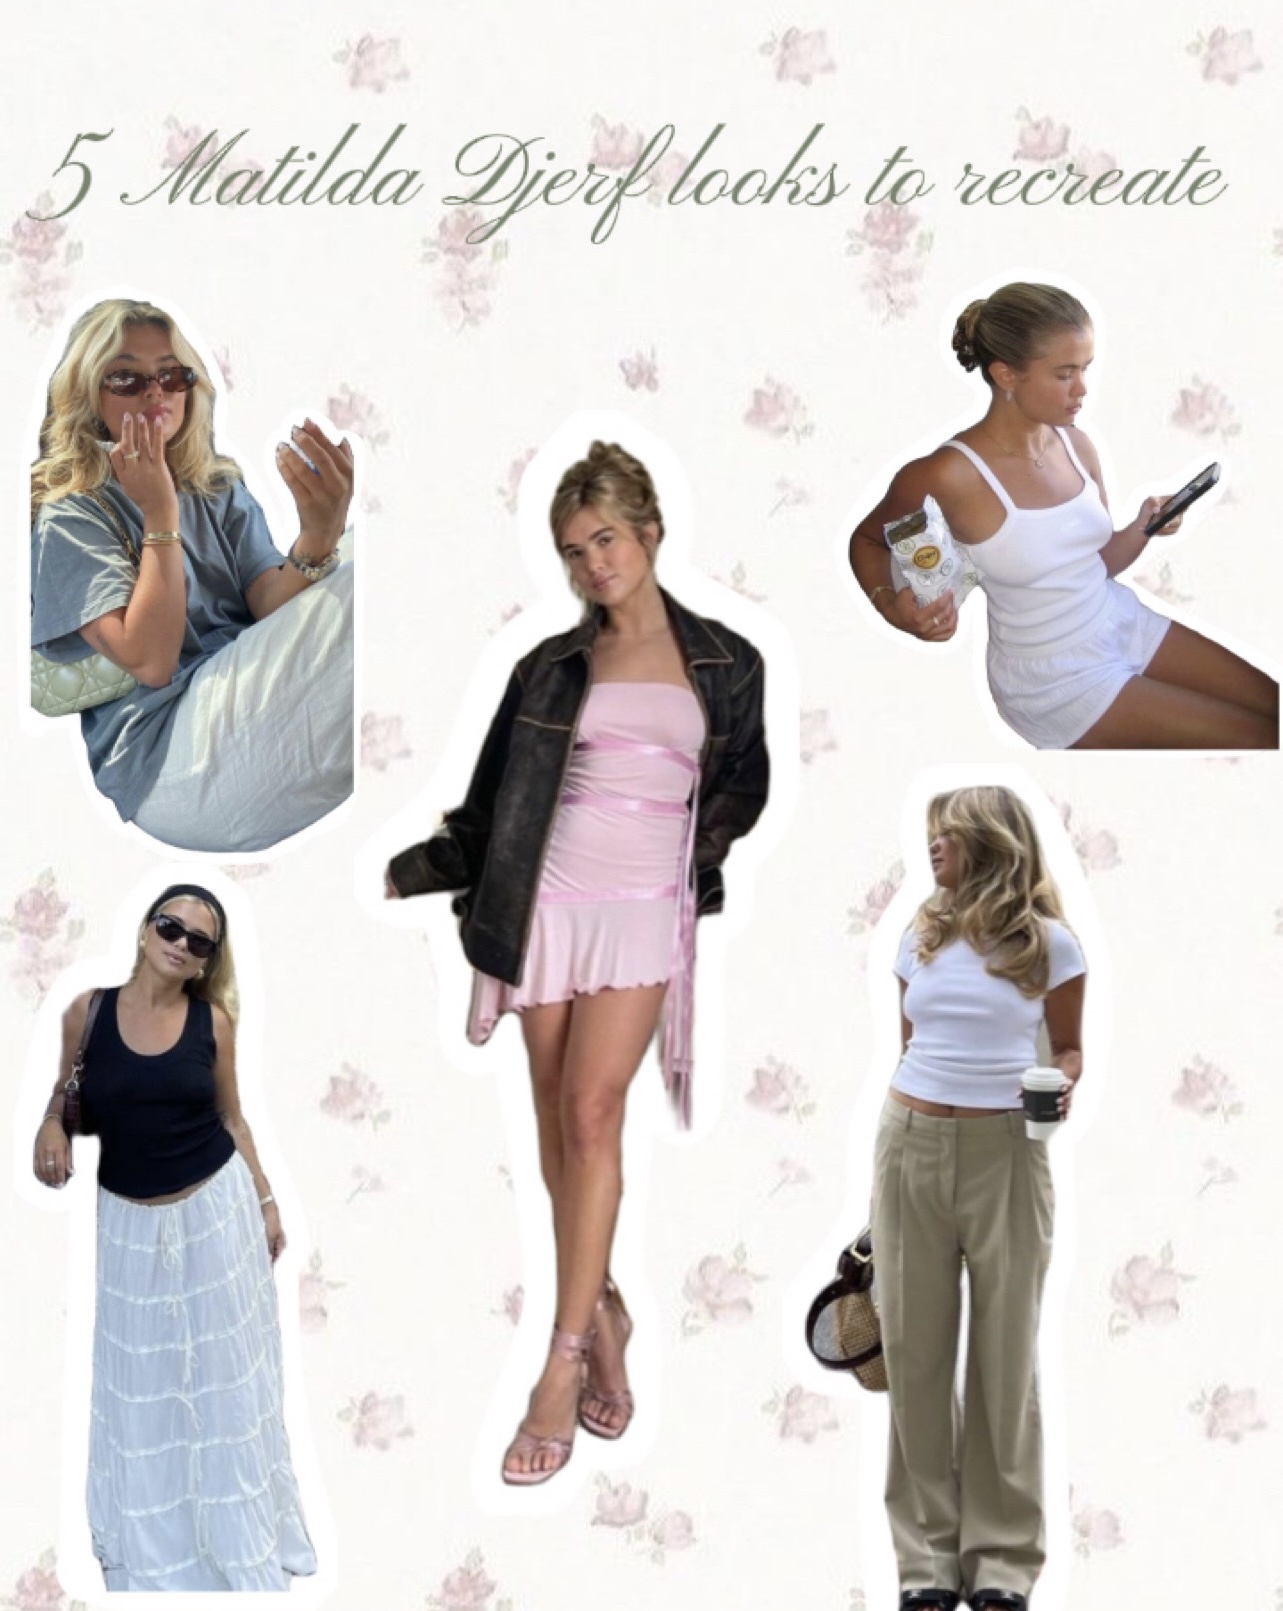 djerf pajama pants  Outfits, Clothes, Comfy outfits